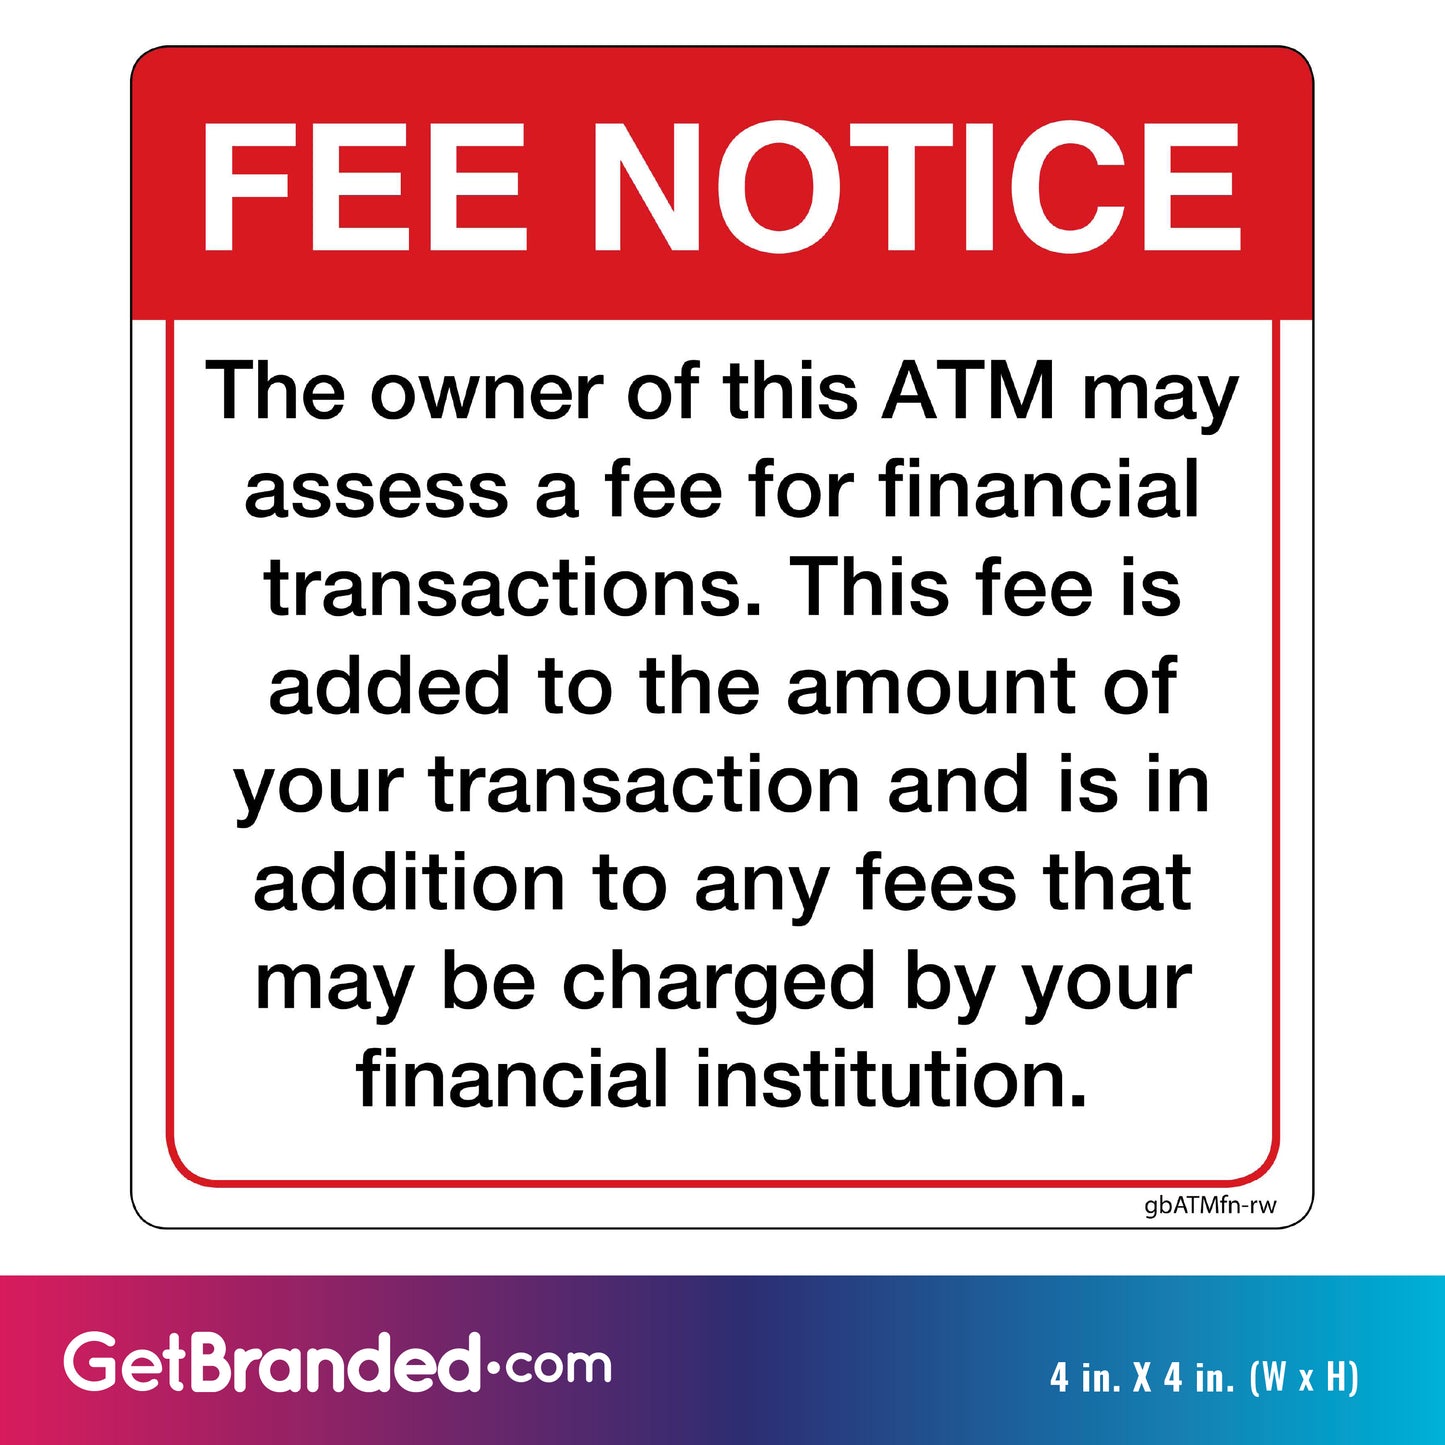 Fee Notice Decal, White with Red Outline size guide.